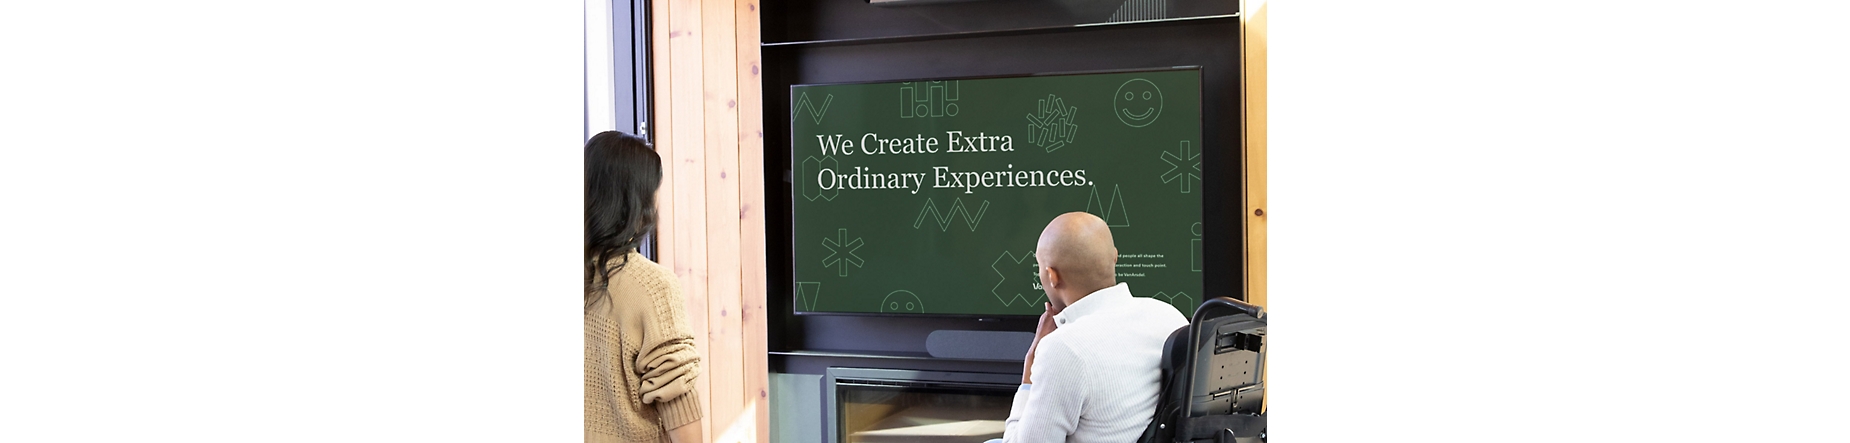 Two people in a meeting room viewing a PowerPoint presentation titled We Create Extra Ordinary Experiences.